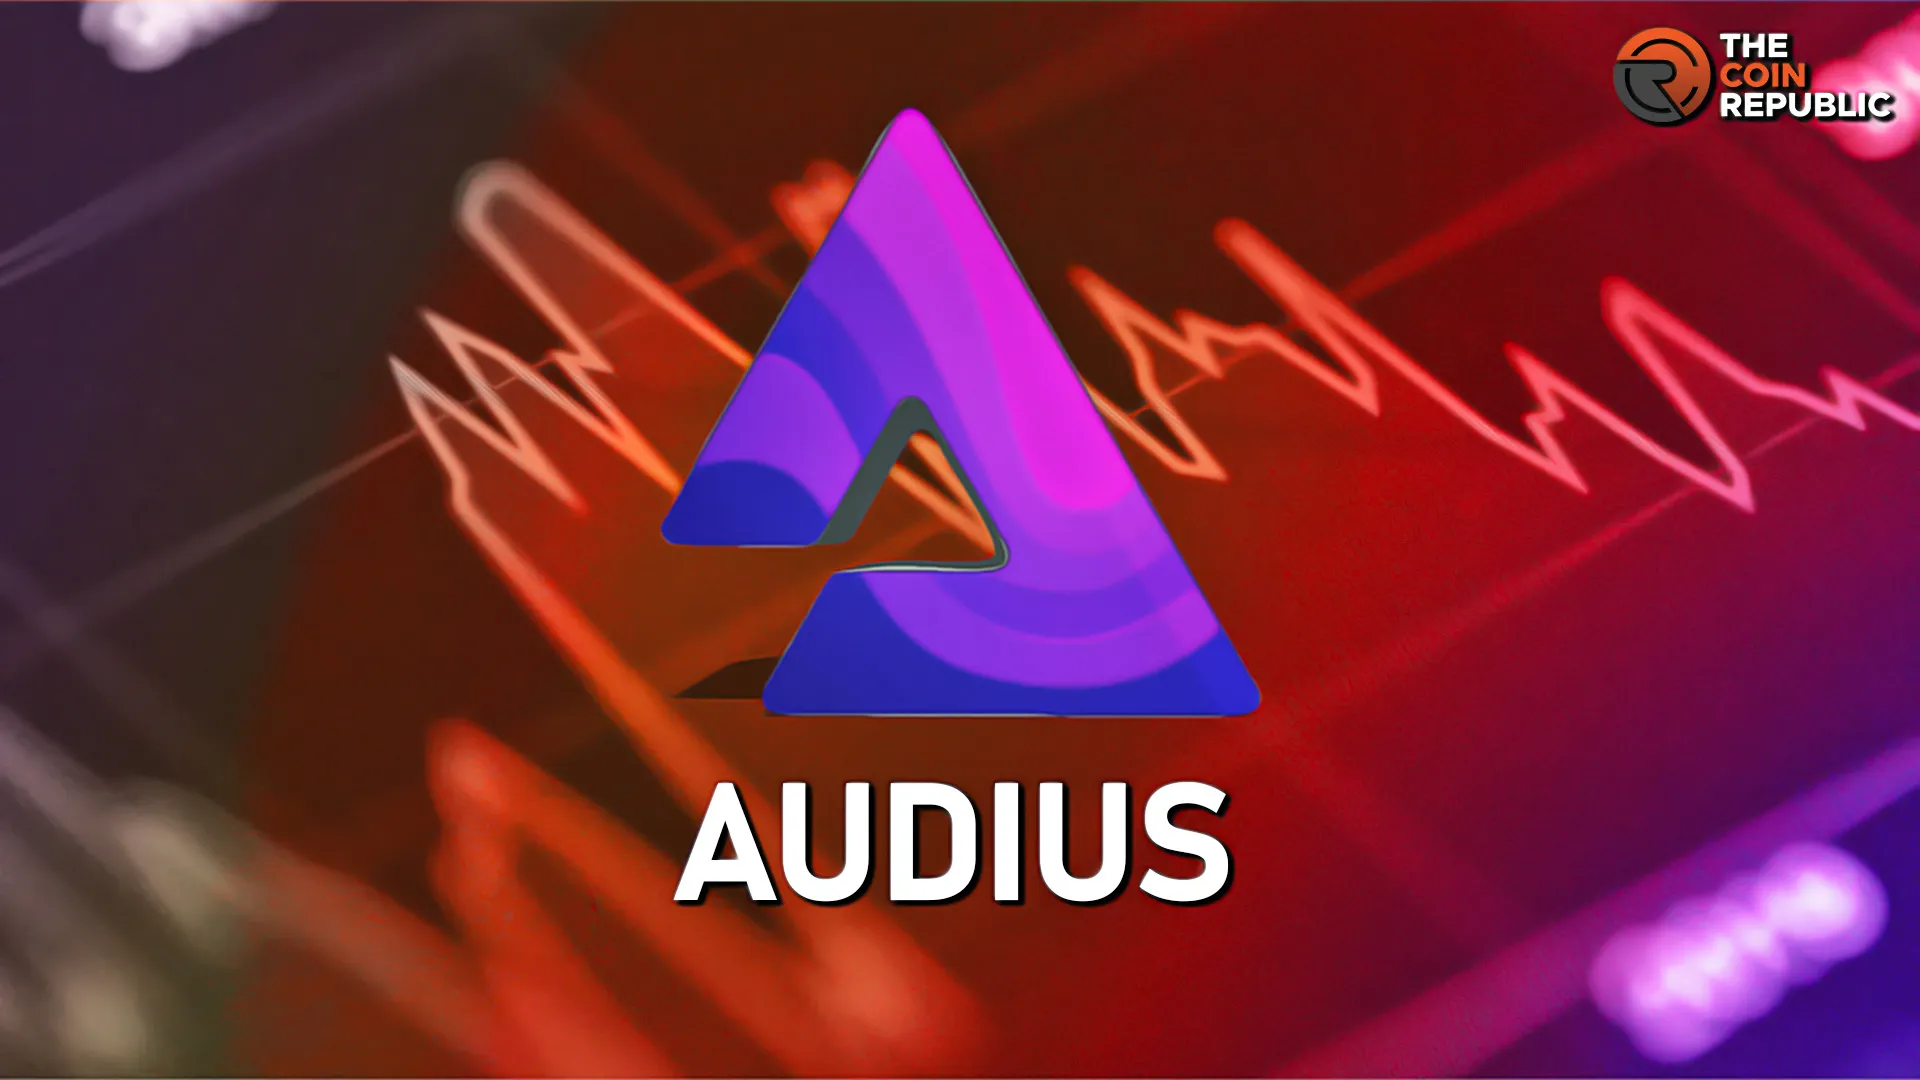 All About Audius: A Decentralized Music Streaming Protocol  